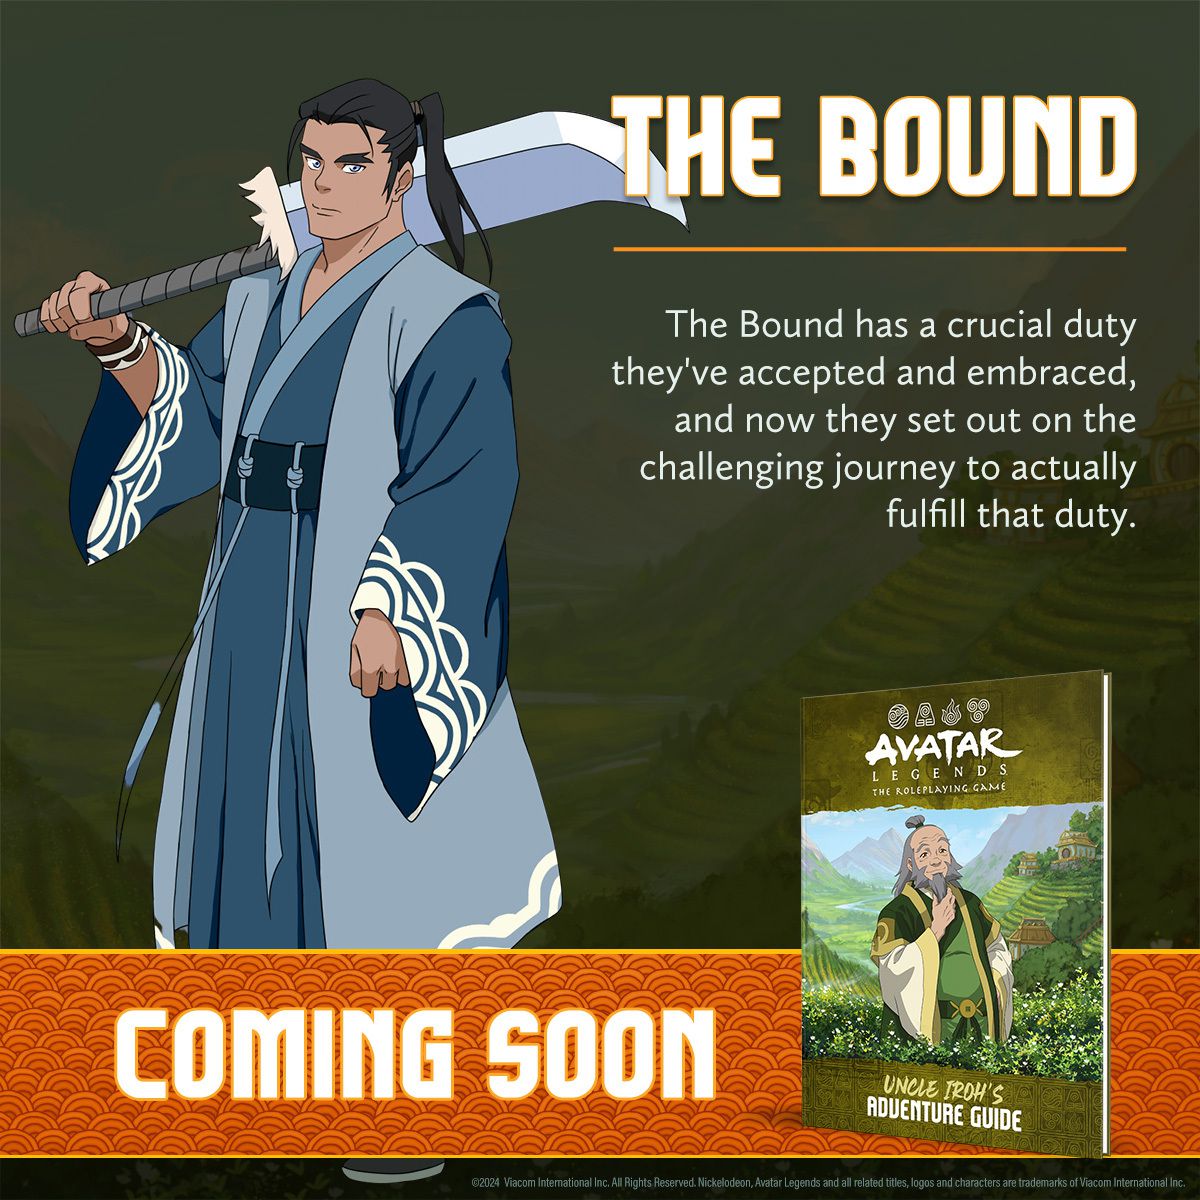 An information card of an Avatar Legends playbook called “The Bound” from Uncle Iroh’s Adventure Guide. “The Bound has a crucial duty they’ve accepted and embraced, and now they set out on the challenging journey to actually fulfill that duty,” reads the text. 